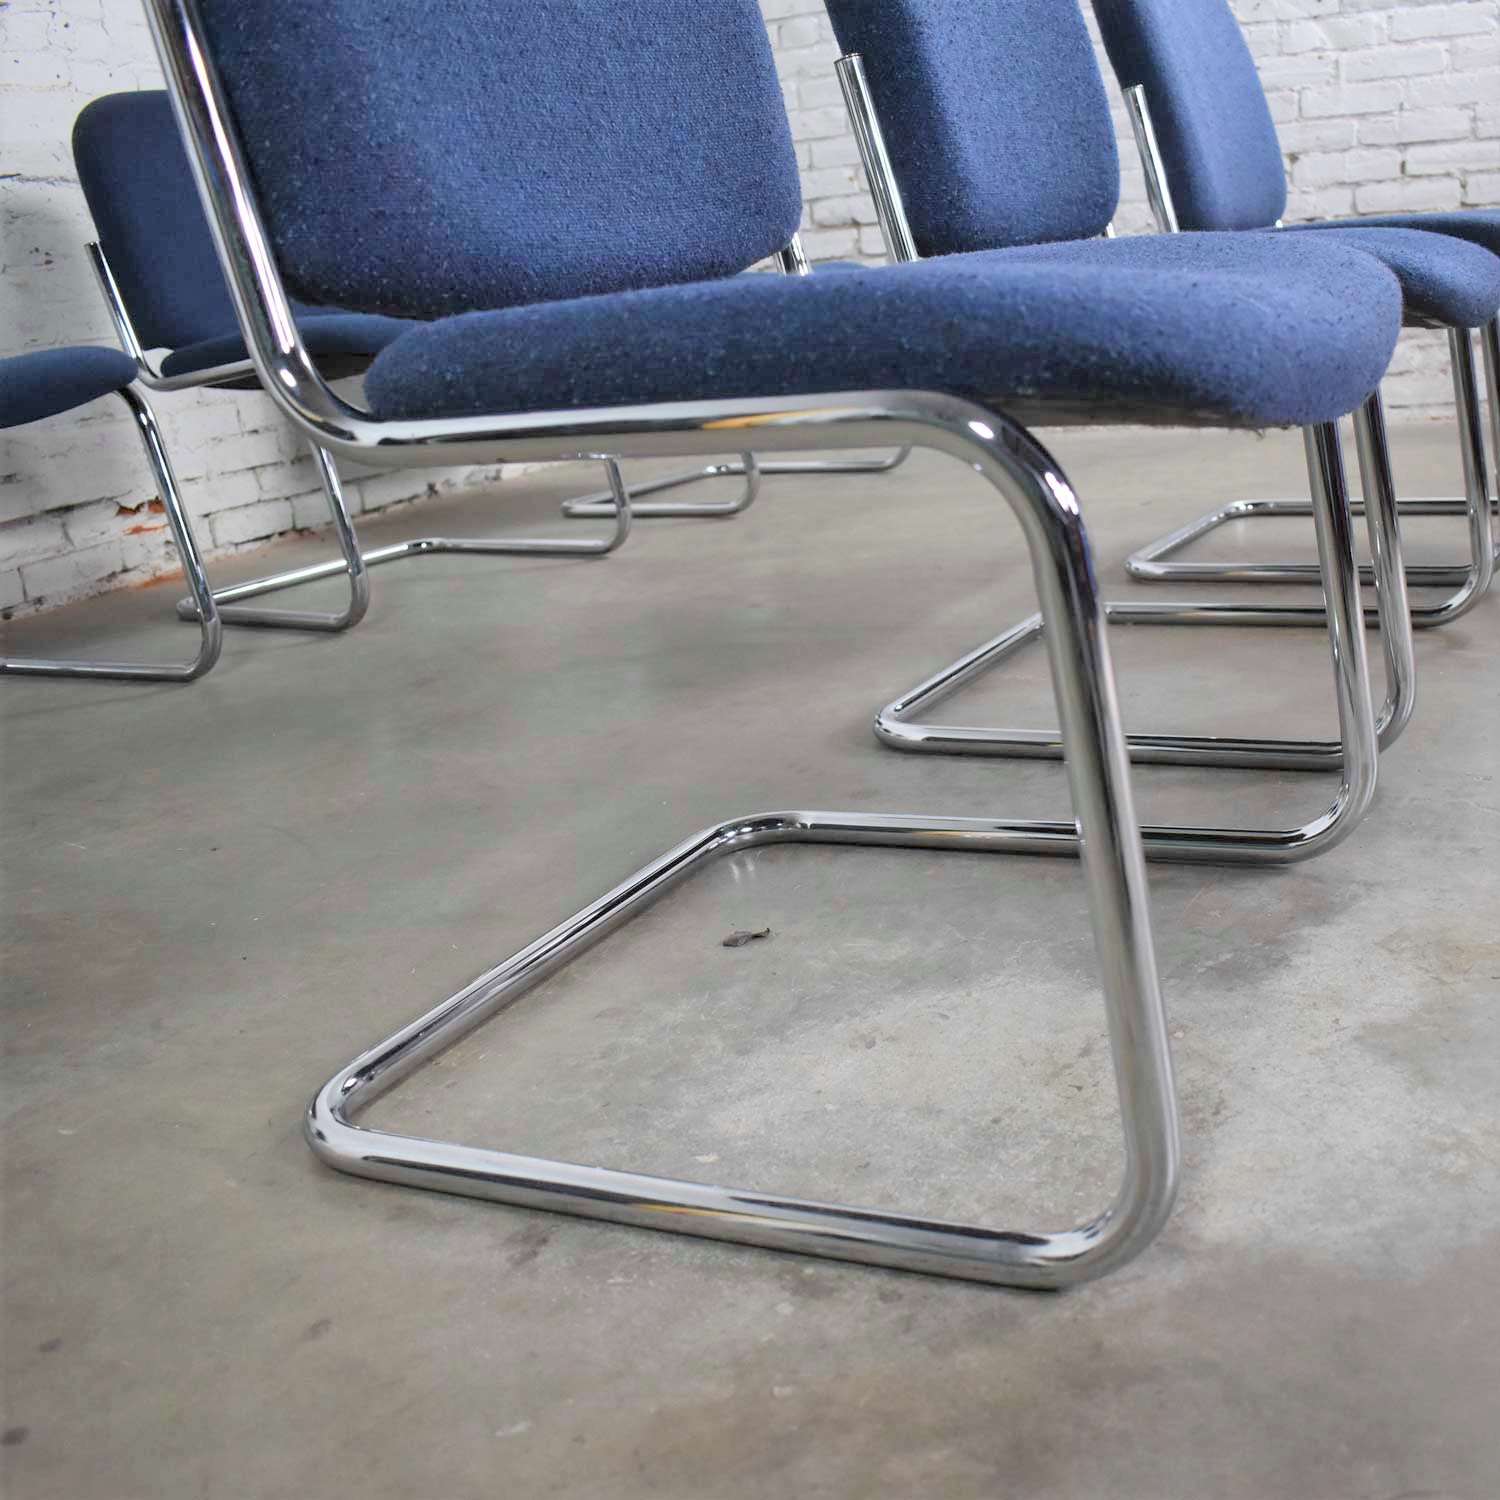 Vintage Tubular Chrome and Blue Fabric Cantilever Lounge Chair Armless Slipper Style, 7 Available